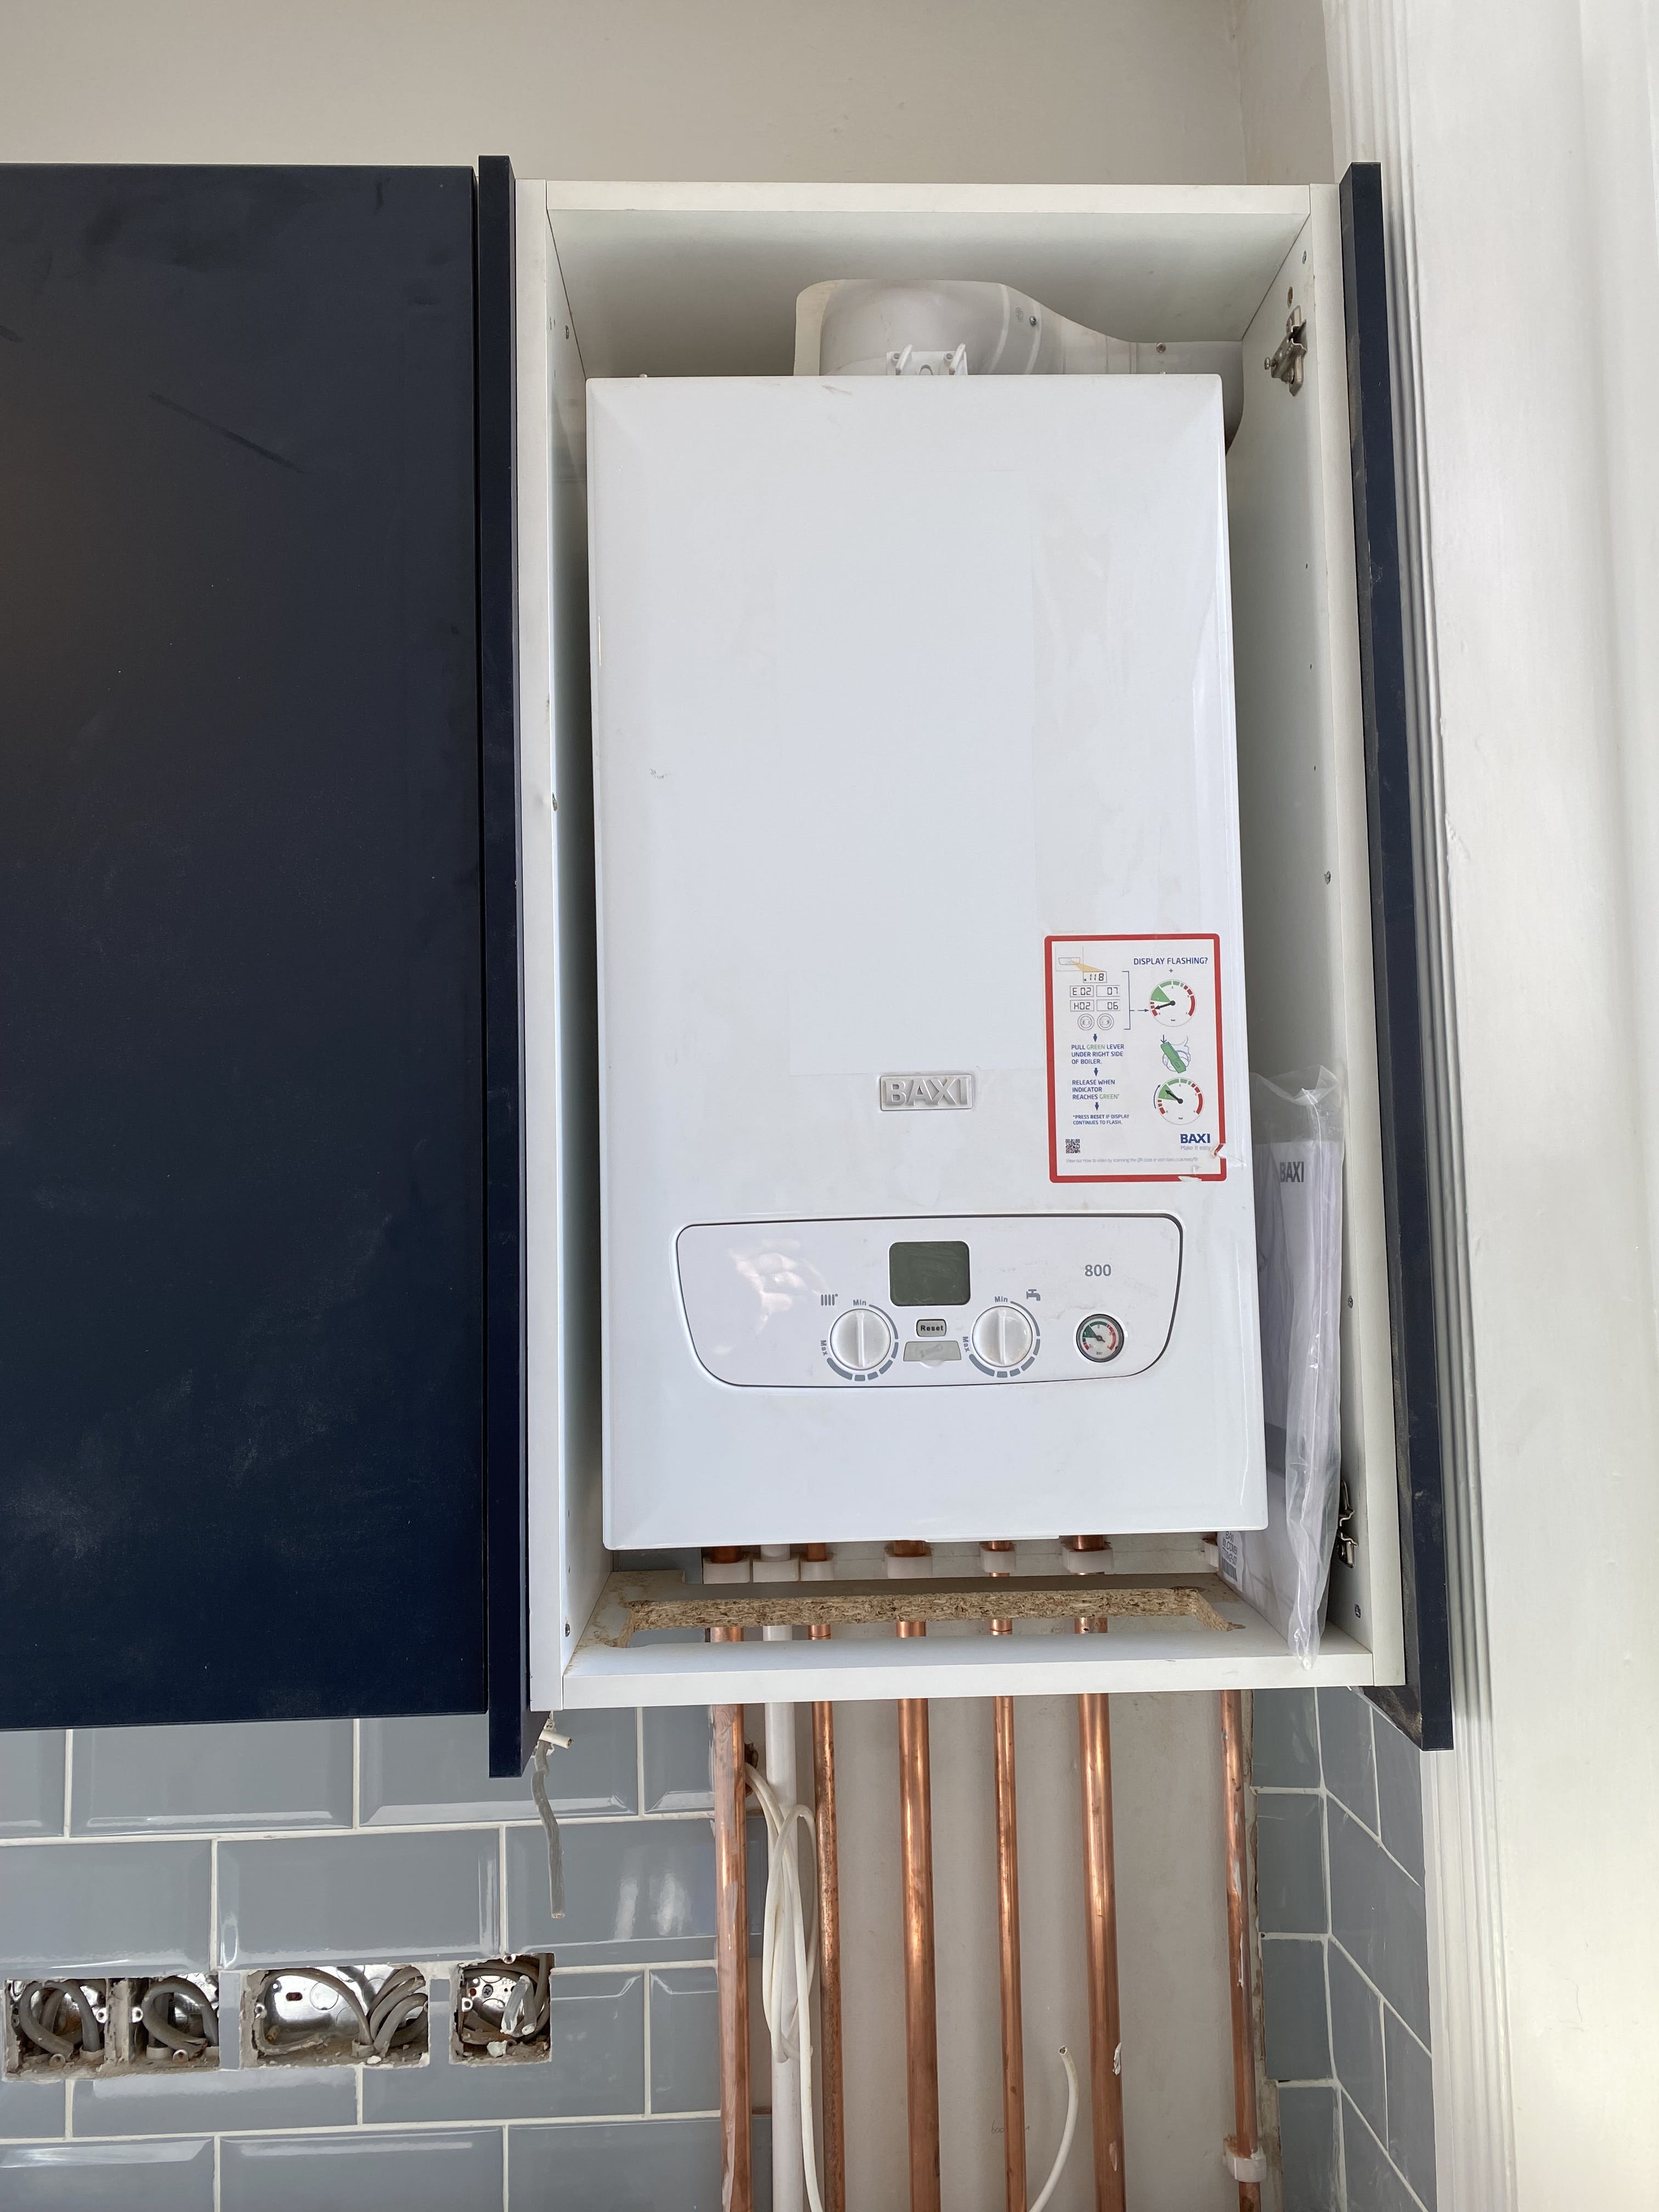 Boiler buying guide: How to chose the right boiler for your home